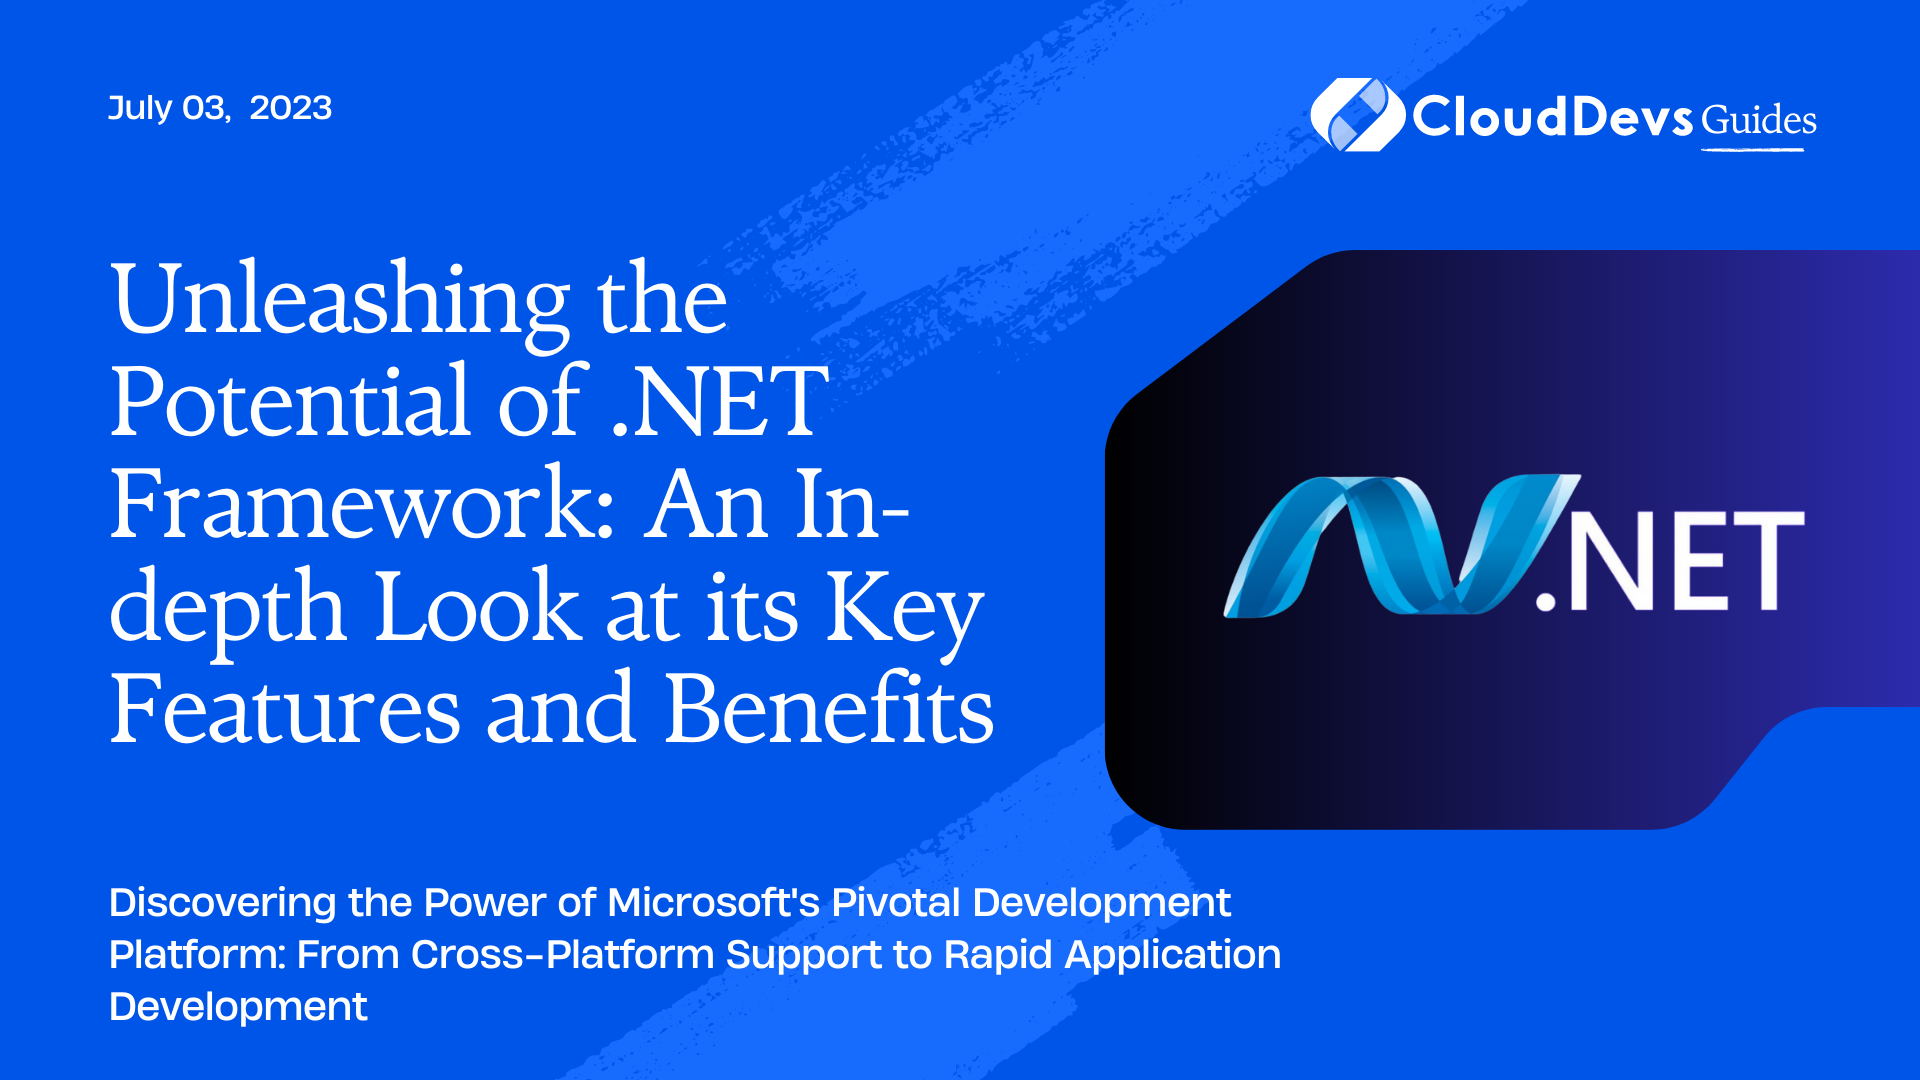 Unleashing the Potential of .NET Framework: An In-depth Look at its Key Features and Benefits